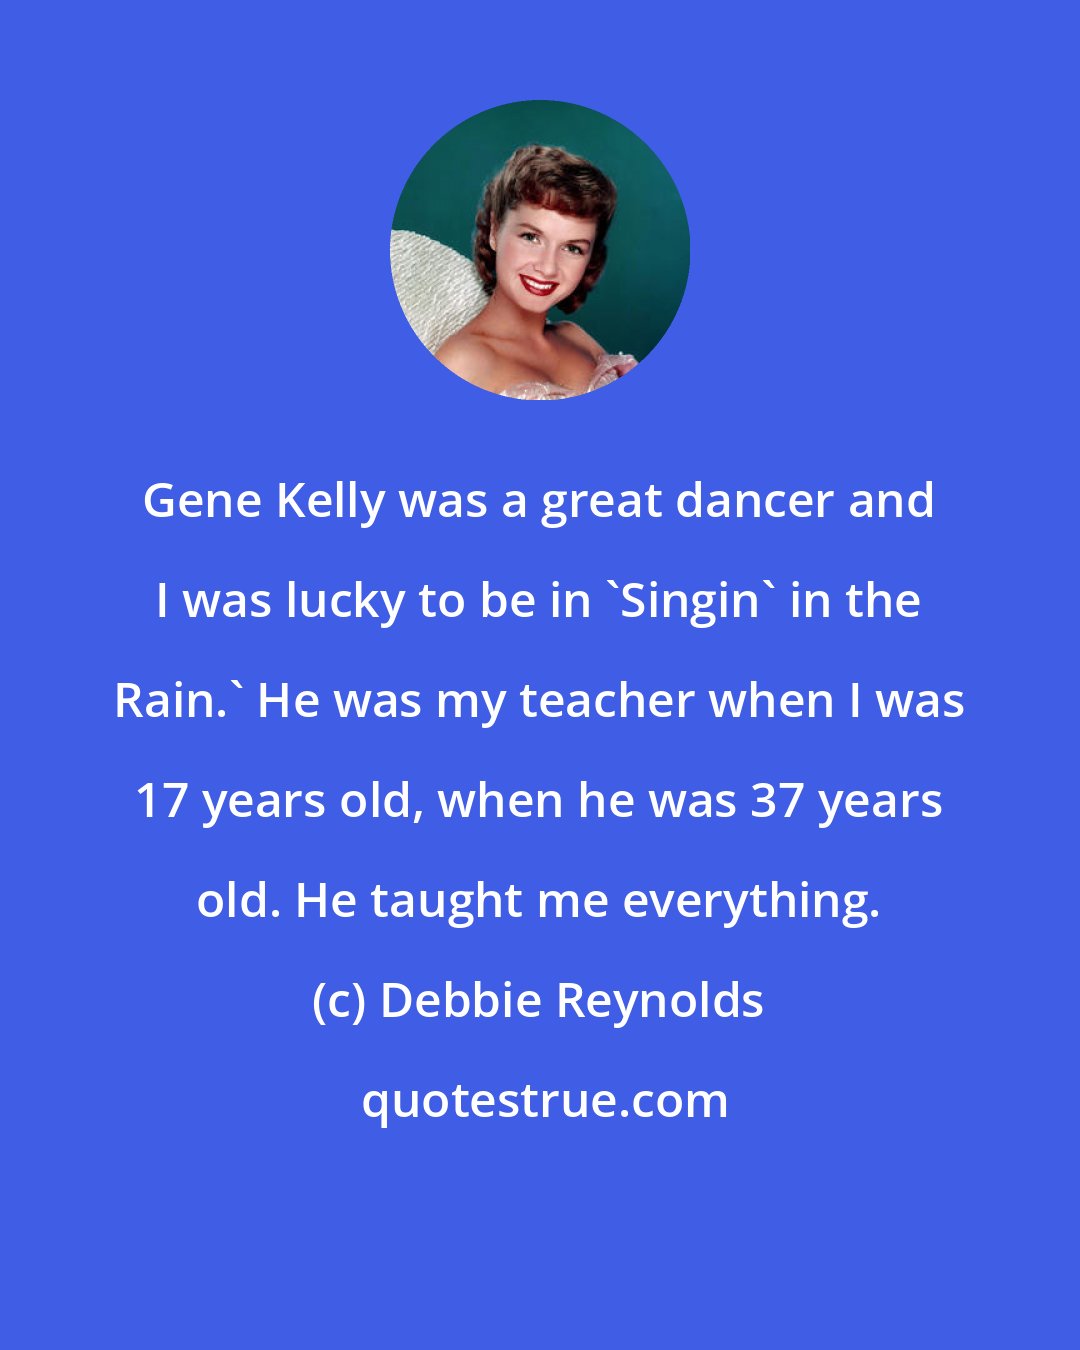 Debbie Reynolds: Gene Kelly was a great dancer and I was lucky to be in 'Singin' in the Rain.' He was my teacher when I was 17 years old, when he was 37 years old. He taught me everything.